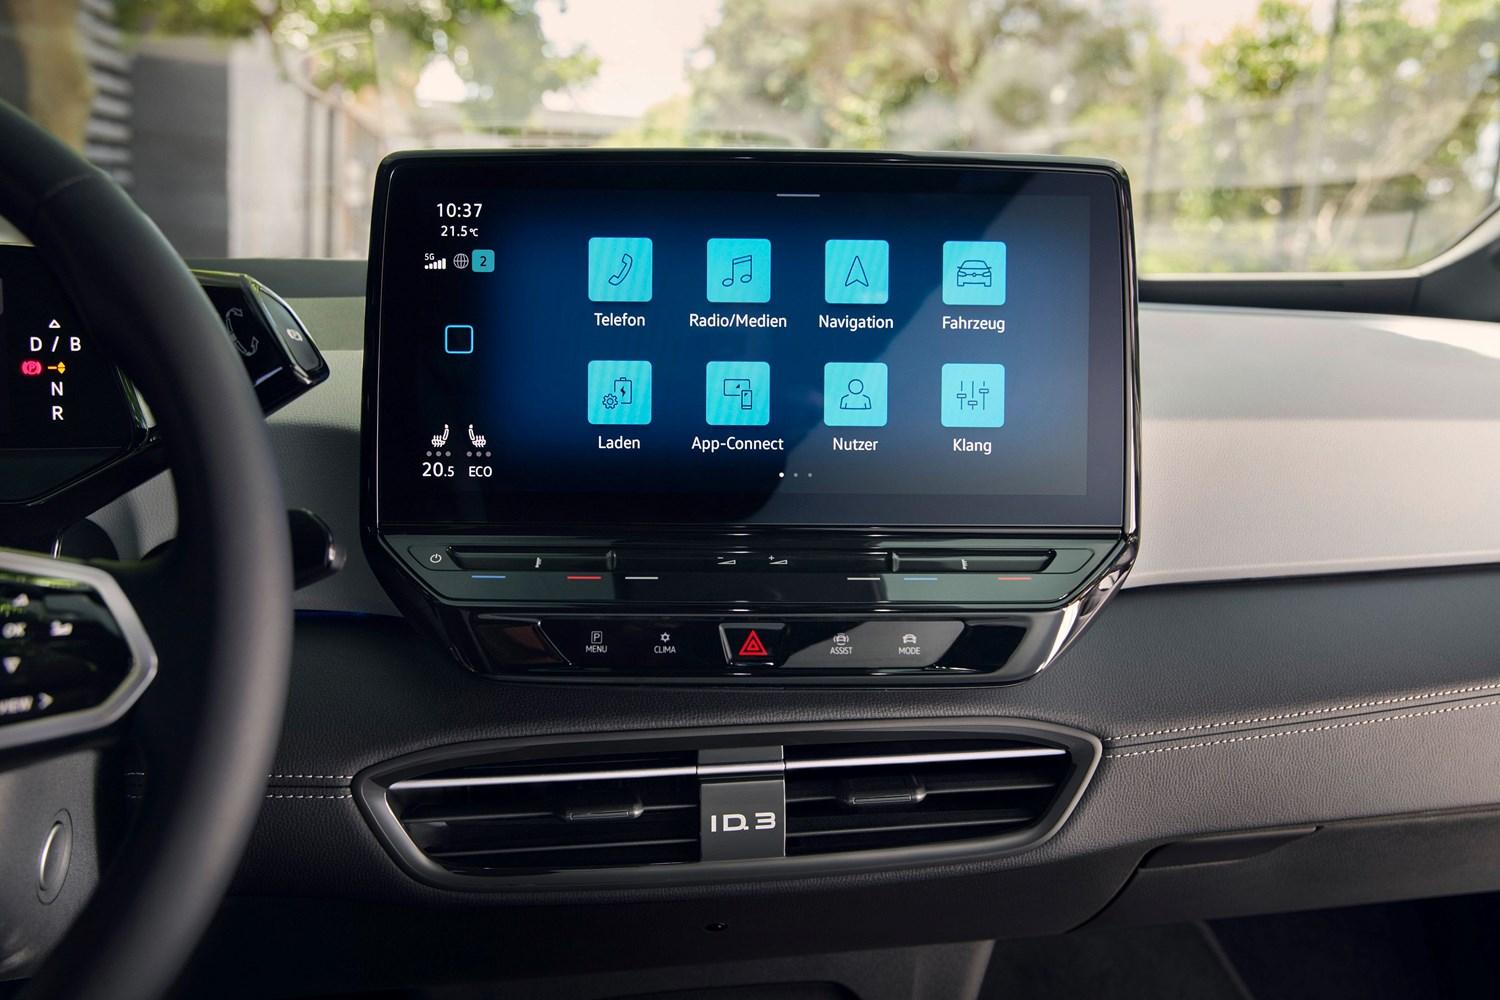 Interior view of the new Volkswagen ID.3, close-up of the infotainment system from the driver side